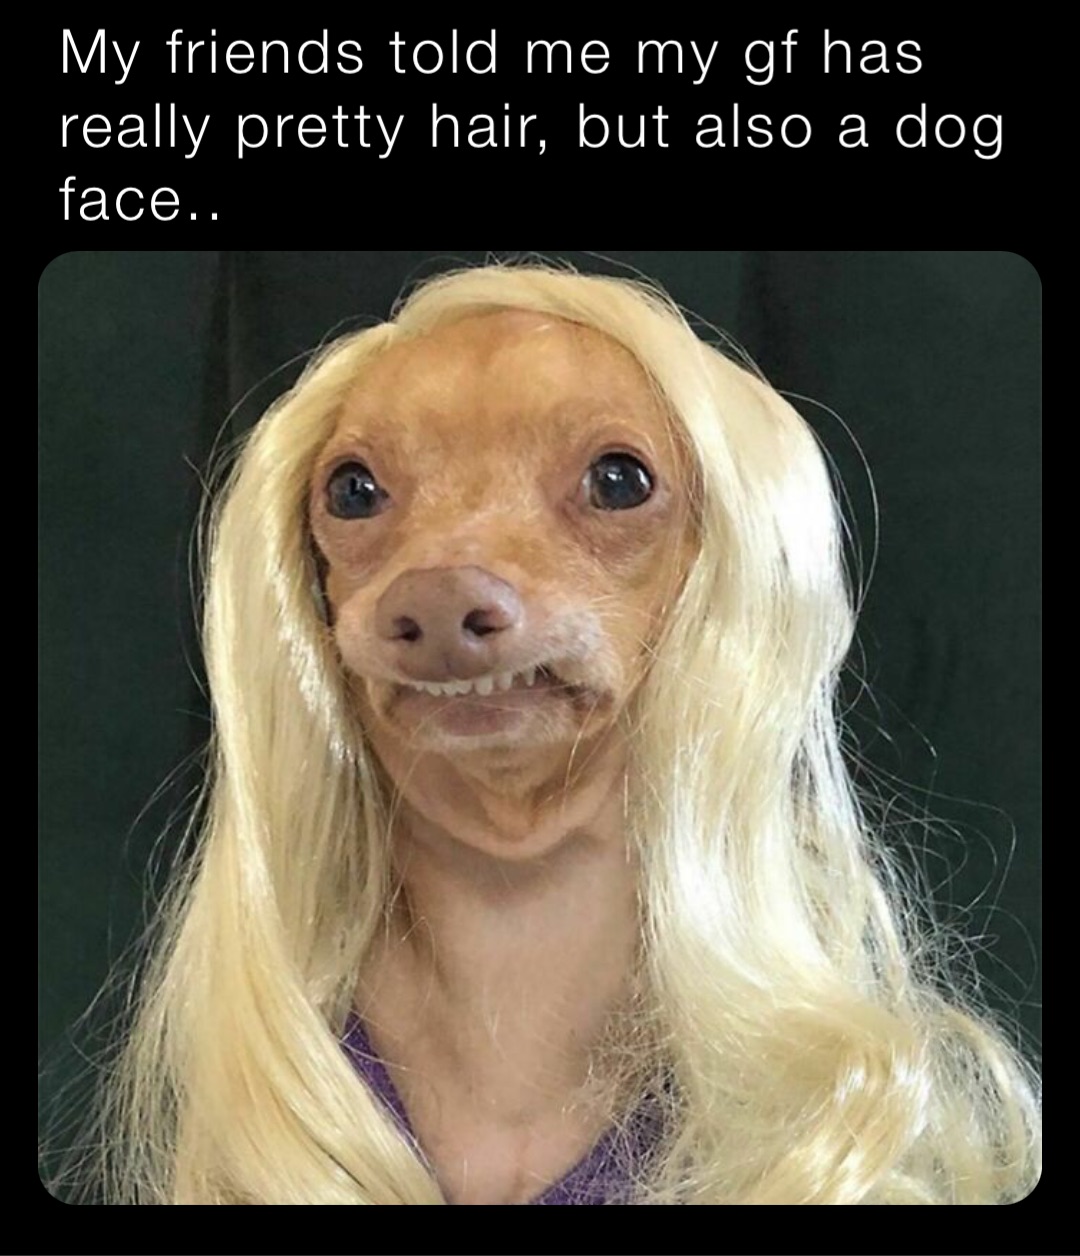 My friends told me my gf has really pretty hair, but also a dog face..